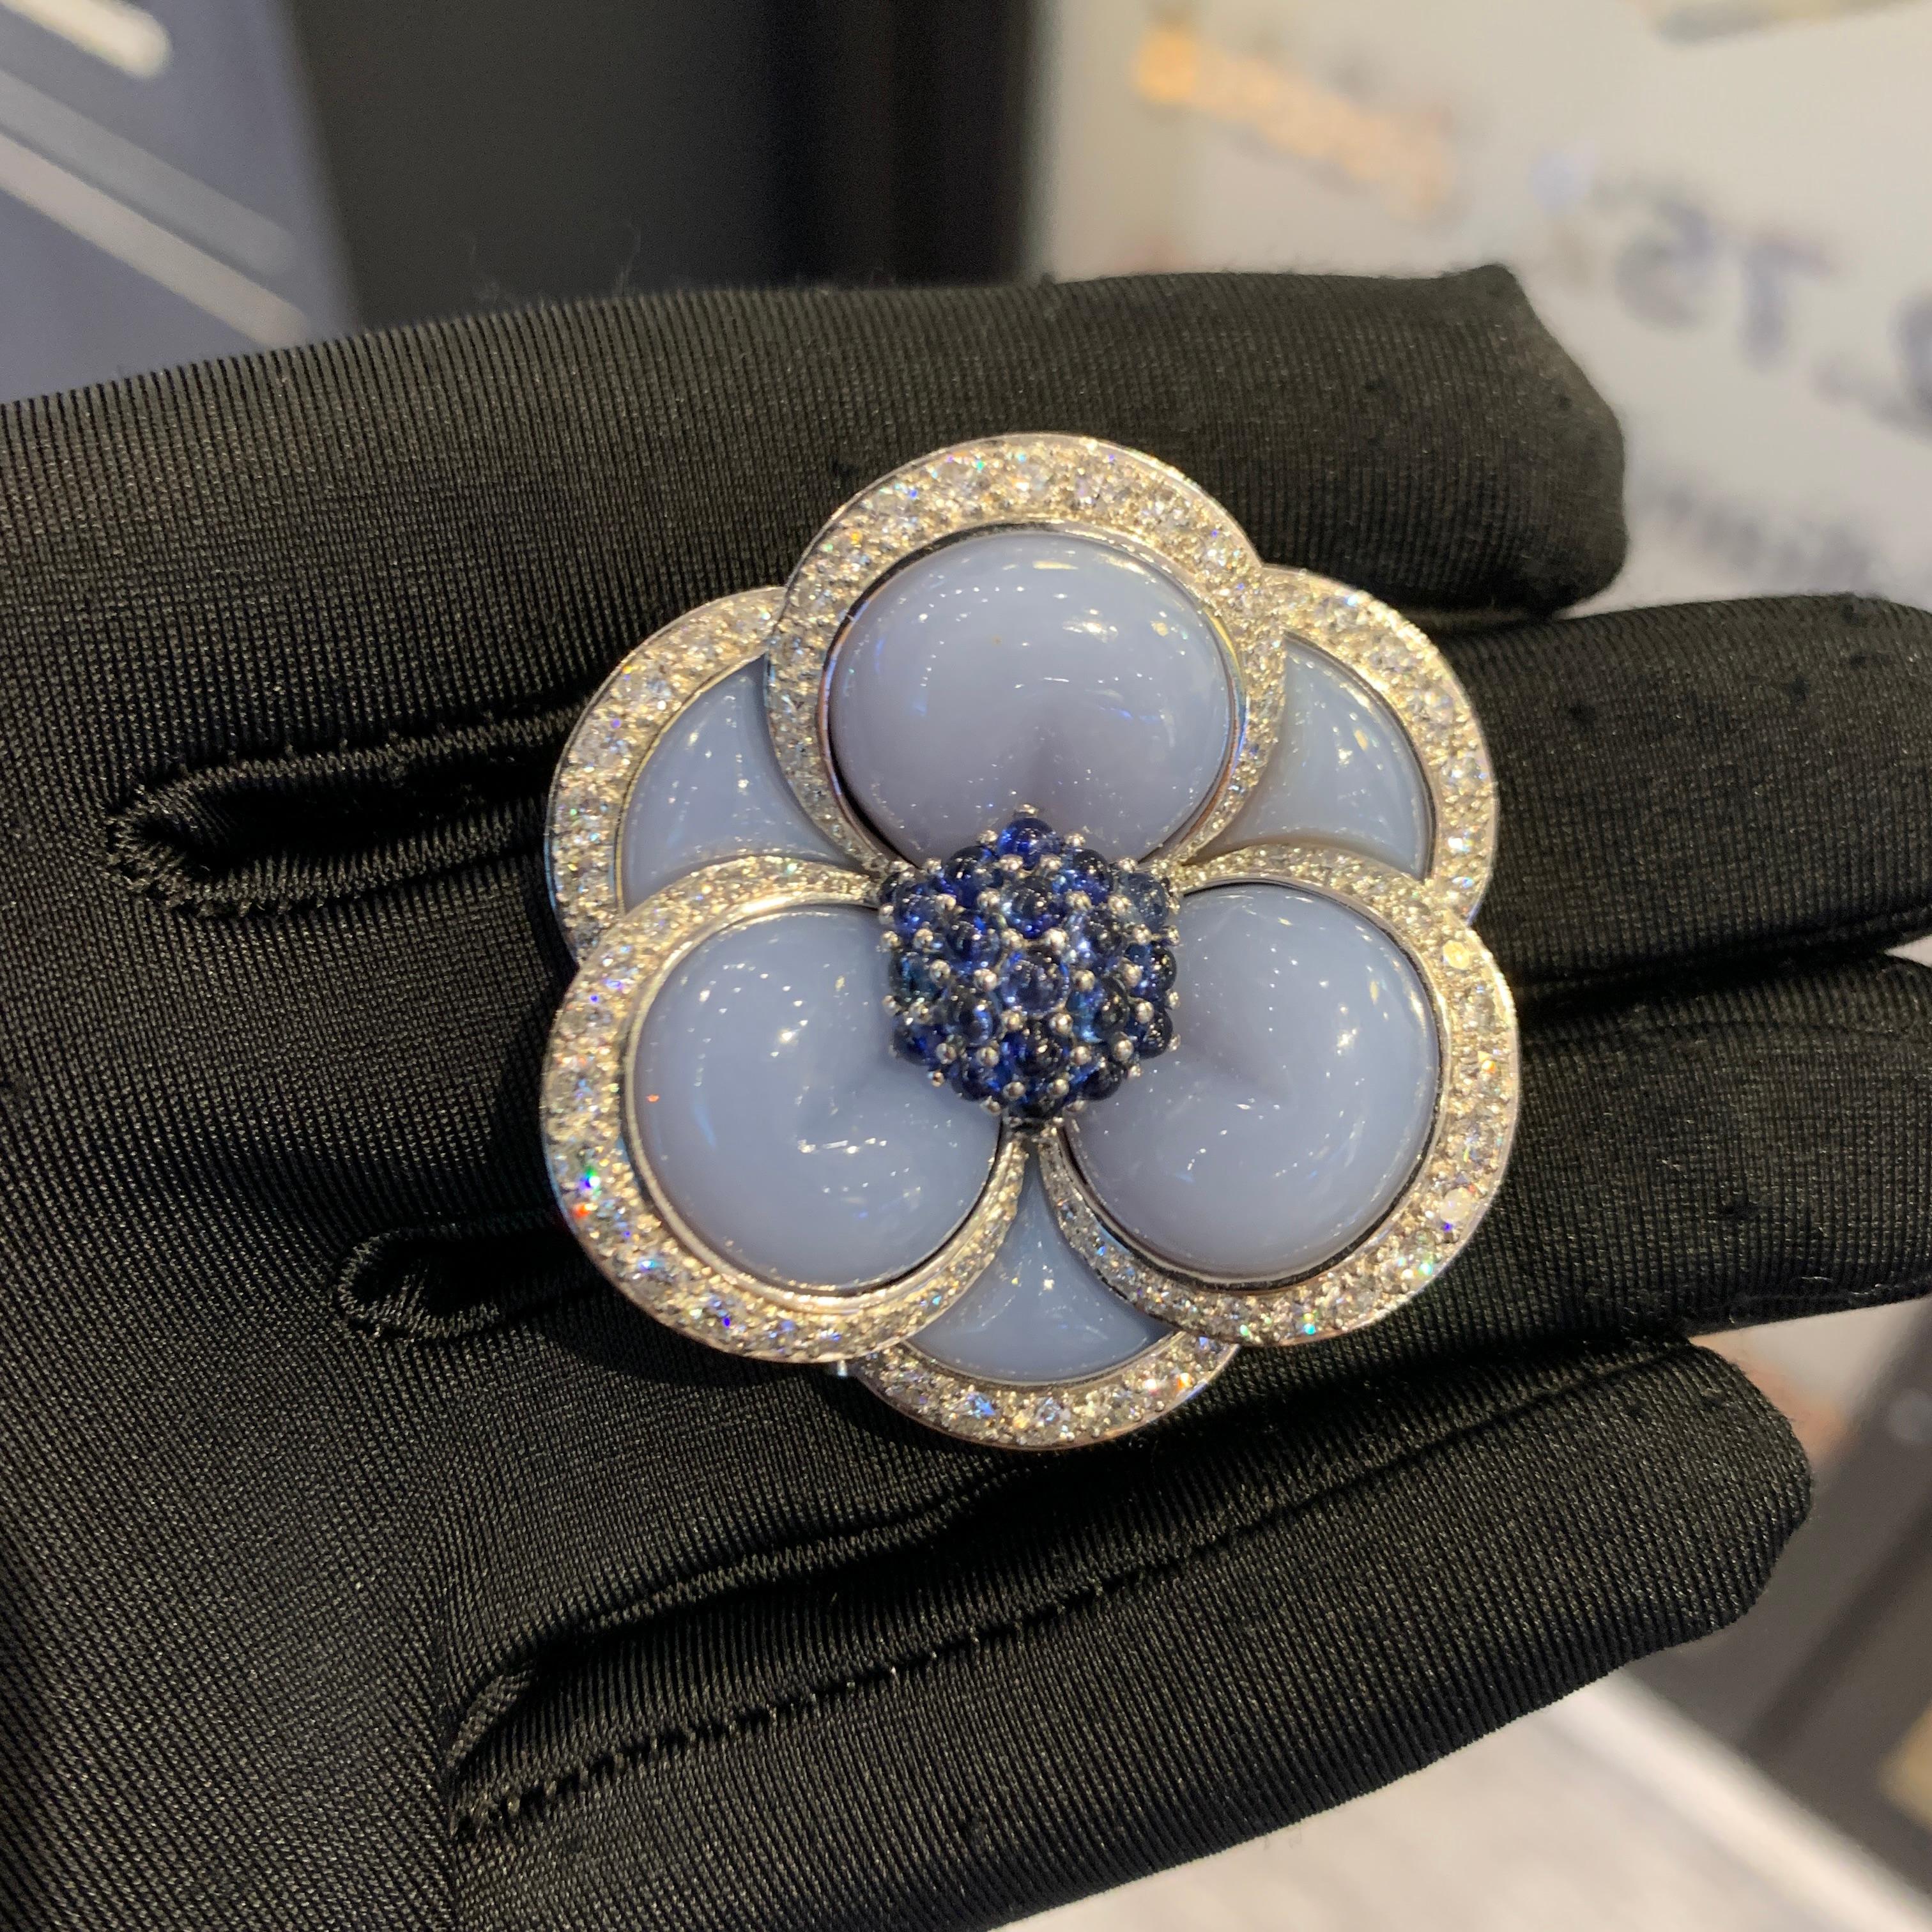 Van Cleef & Arpels Sapphire & Chalcedony Flower Brooch 

A brooch featuring six blue chalcedony petals, 23 round cabochon sapphires, and approximately 3.30 carats of 78 round cut diamonds. 

Measurements: 1.25